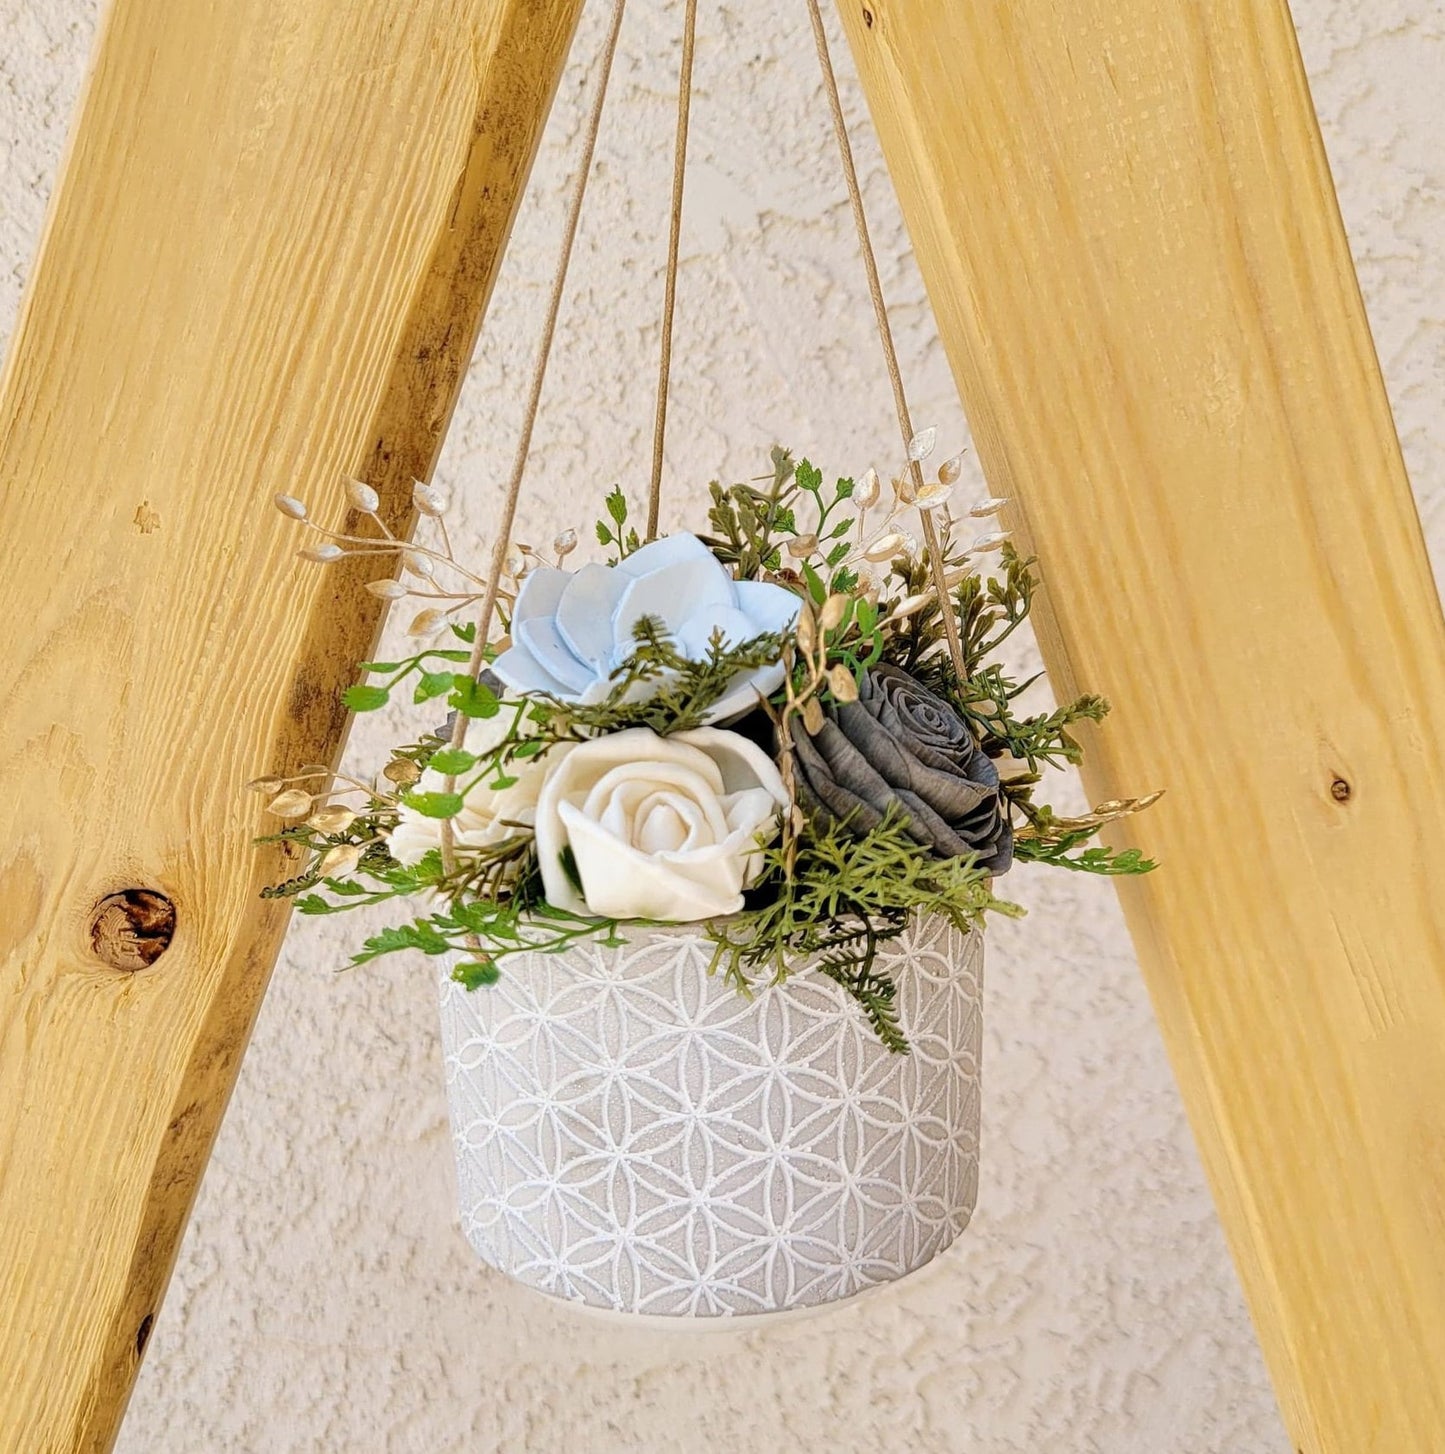 Wood Flower Hanging Planter, Wooden Flowers Housewarming Gift, Cement Planter with Fake Flowers, Wood Flowers Succulent planter